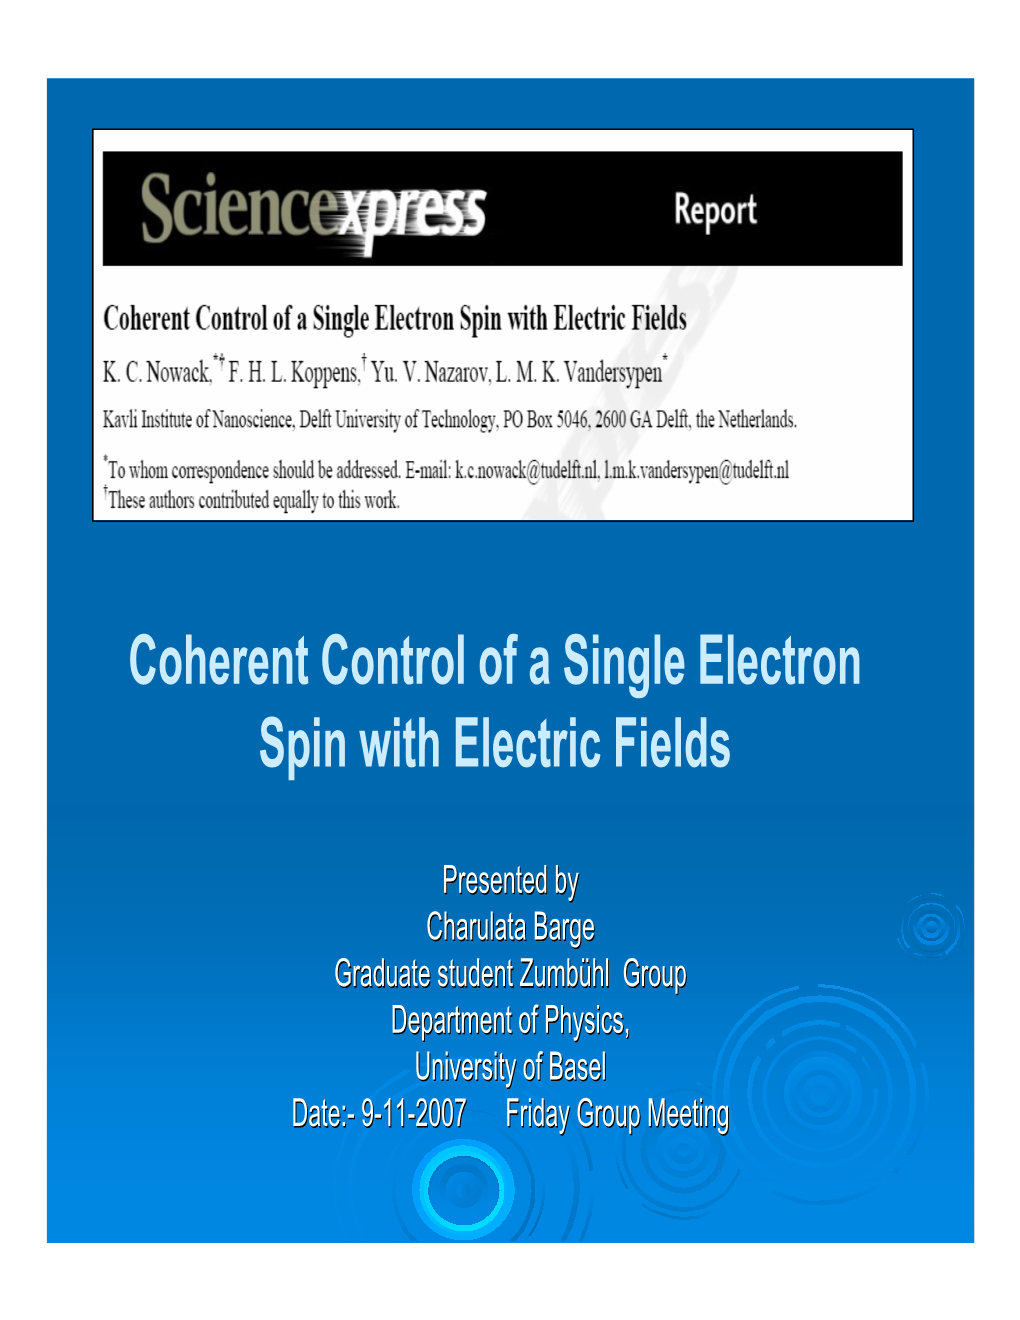 Coherent Control of a Single Electron Spin with Electric Fields